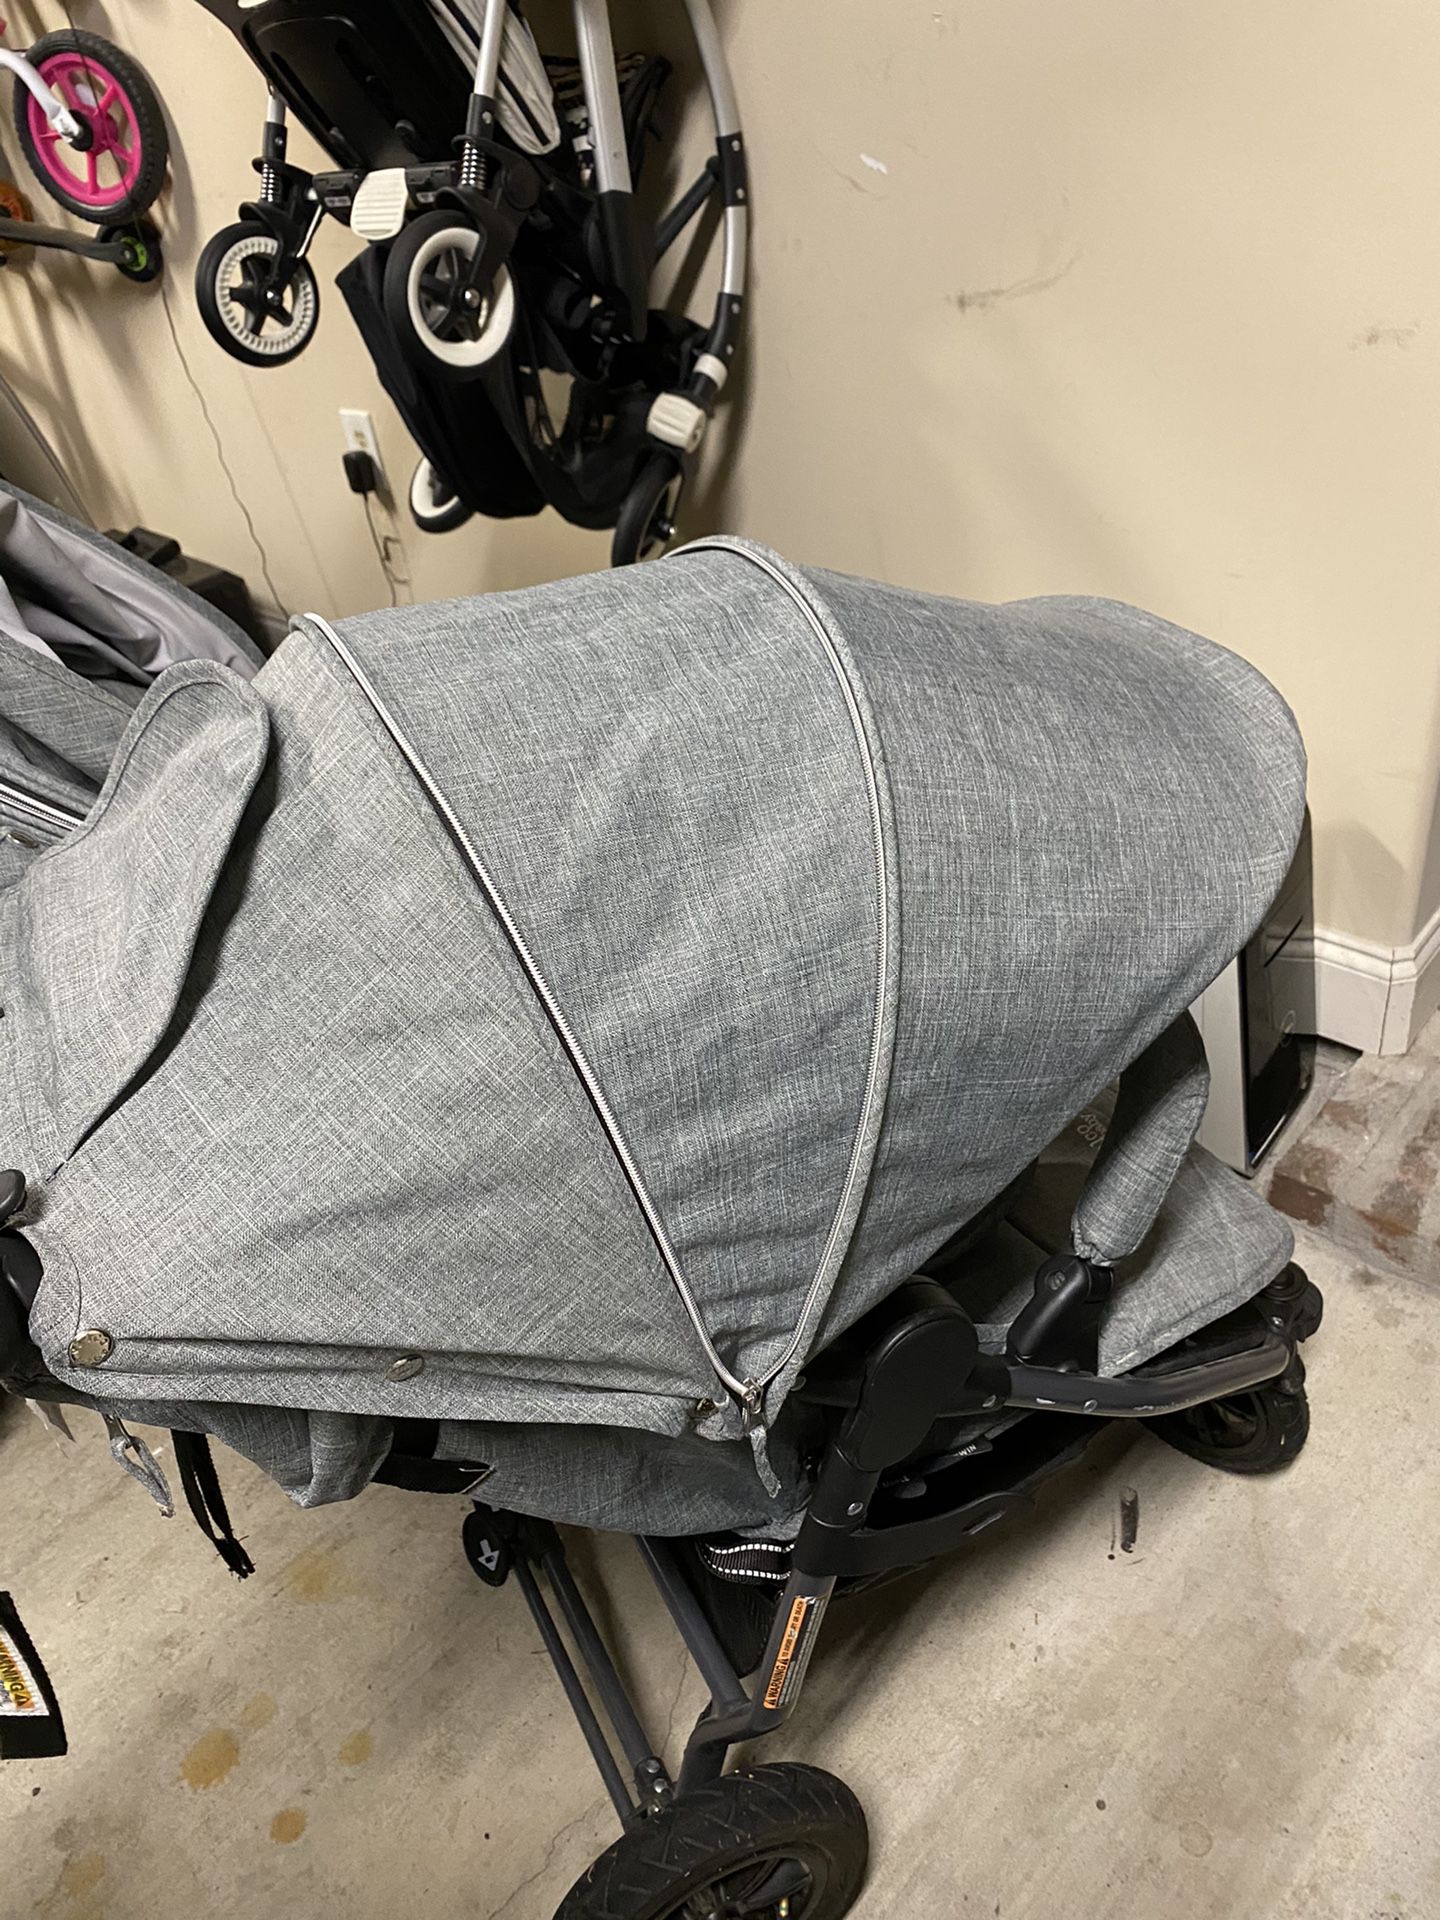 Valco neo twin double stroller